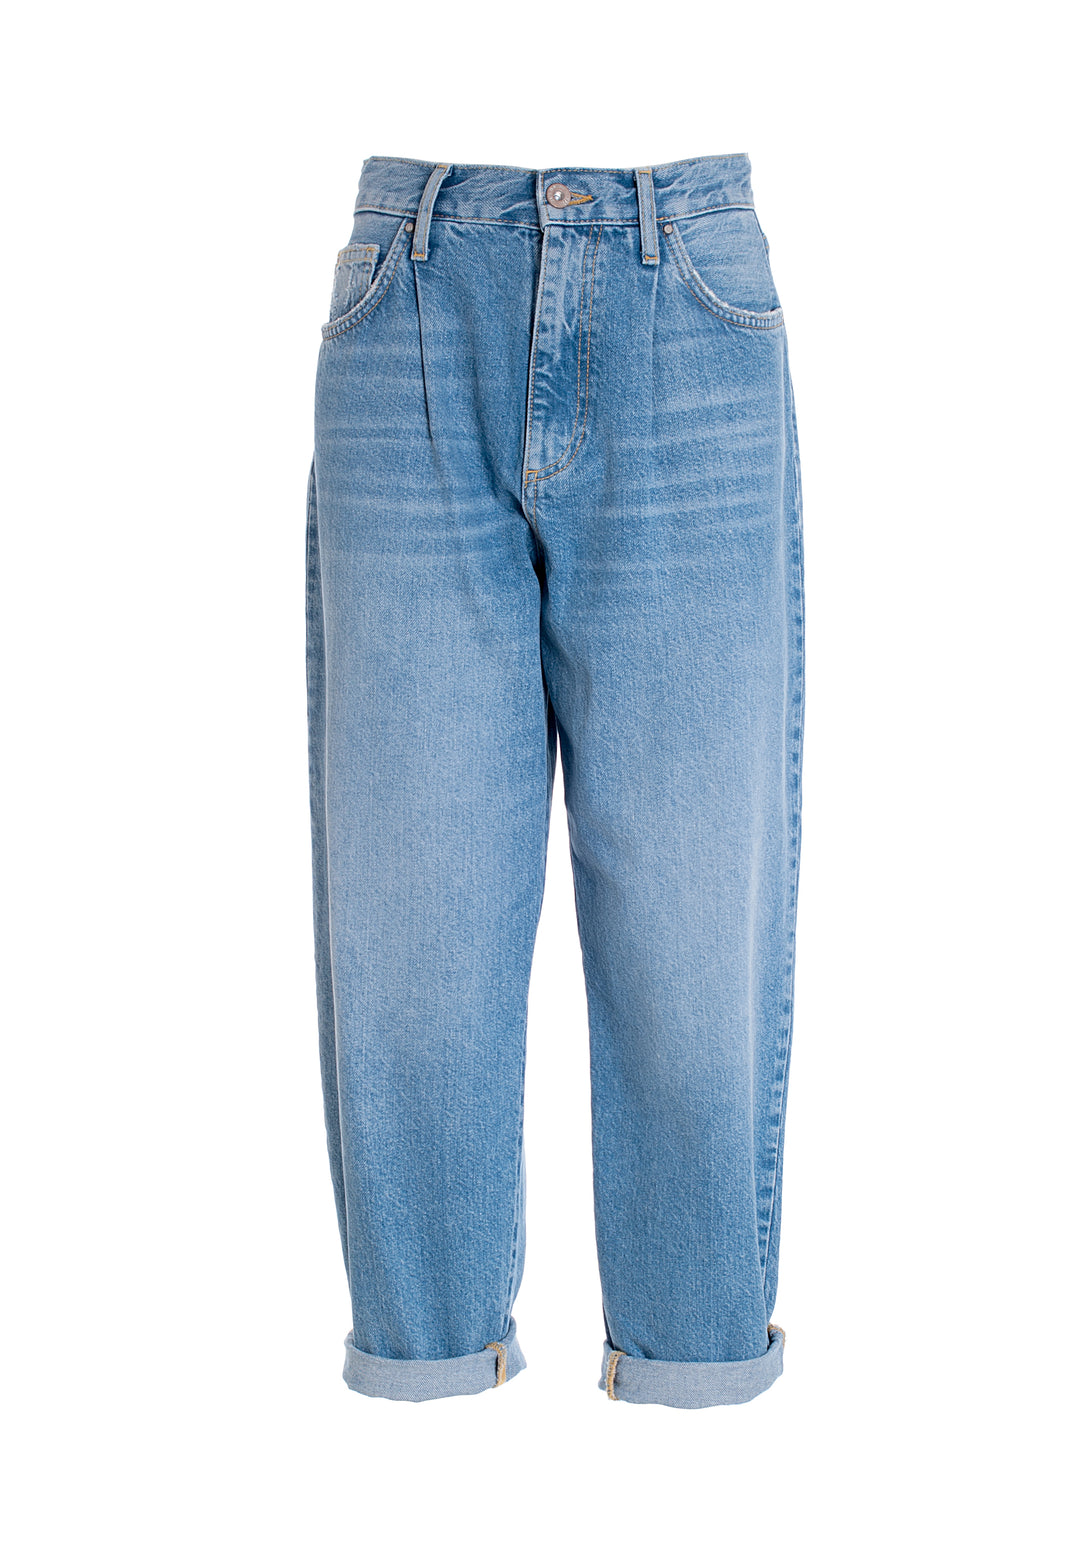 Carrot jeans made in denim with middle wash